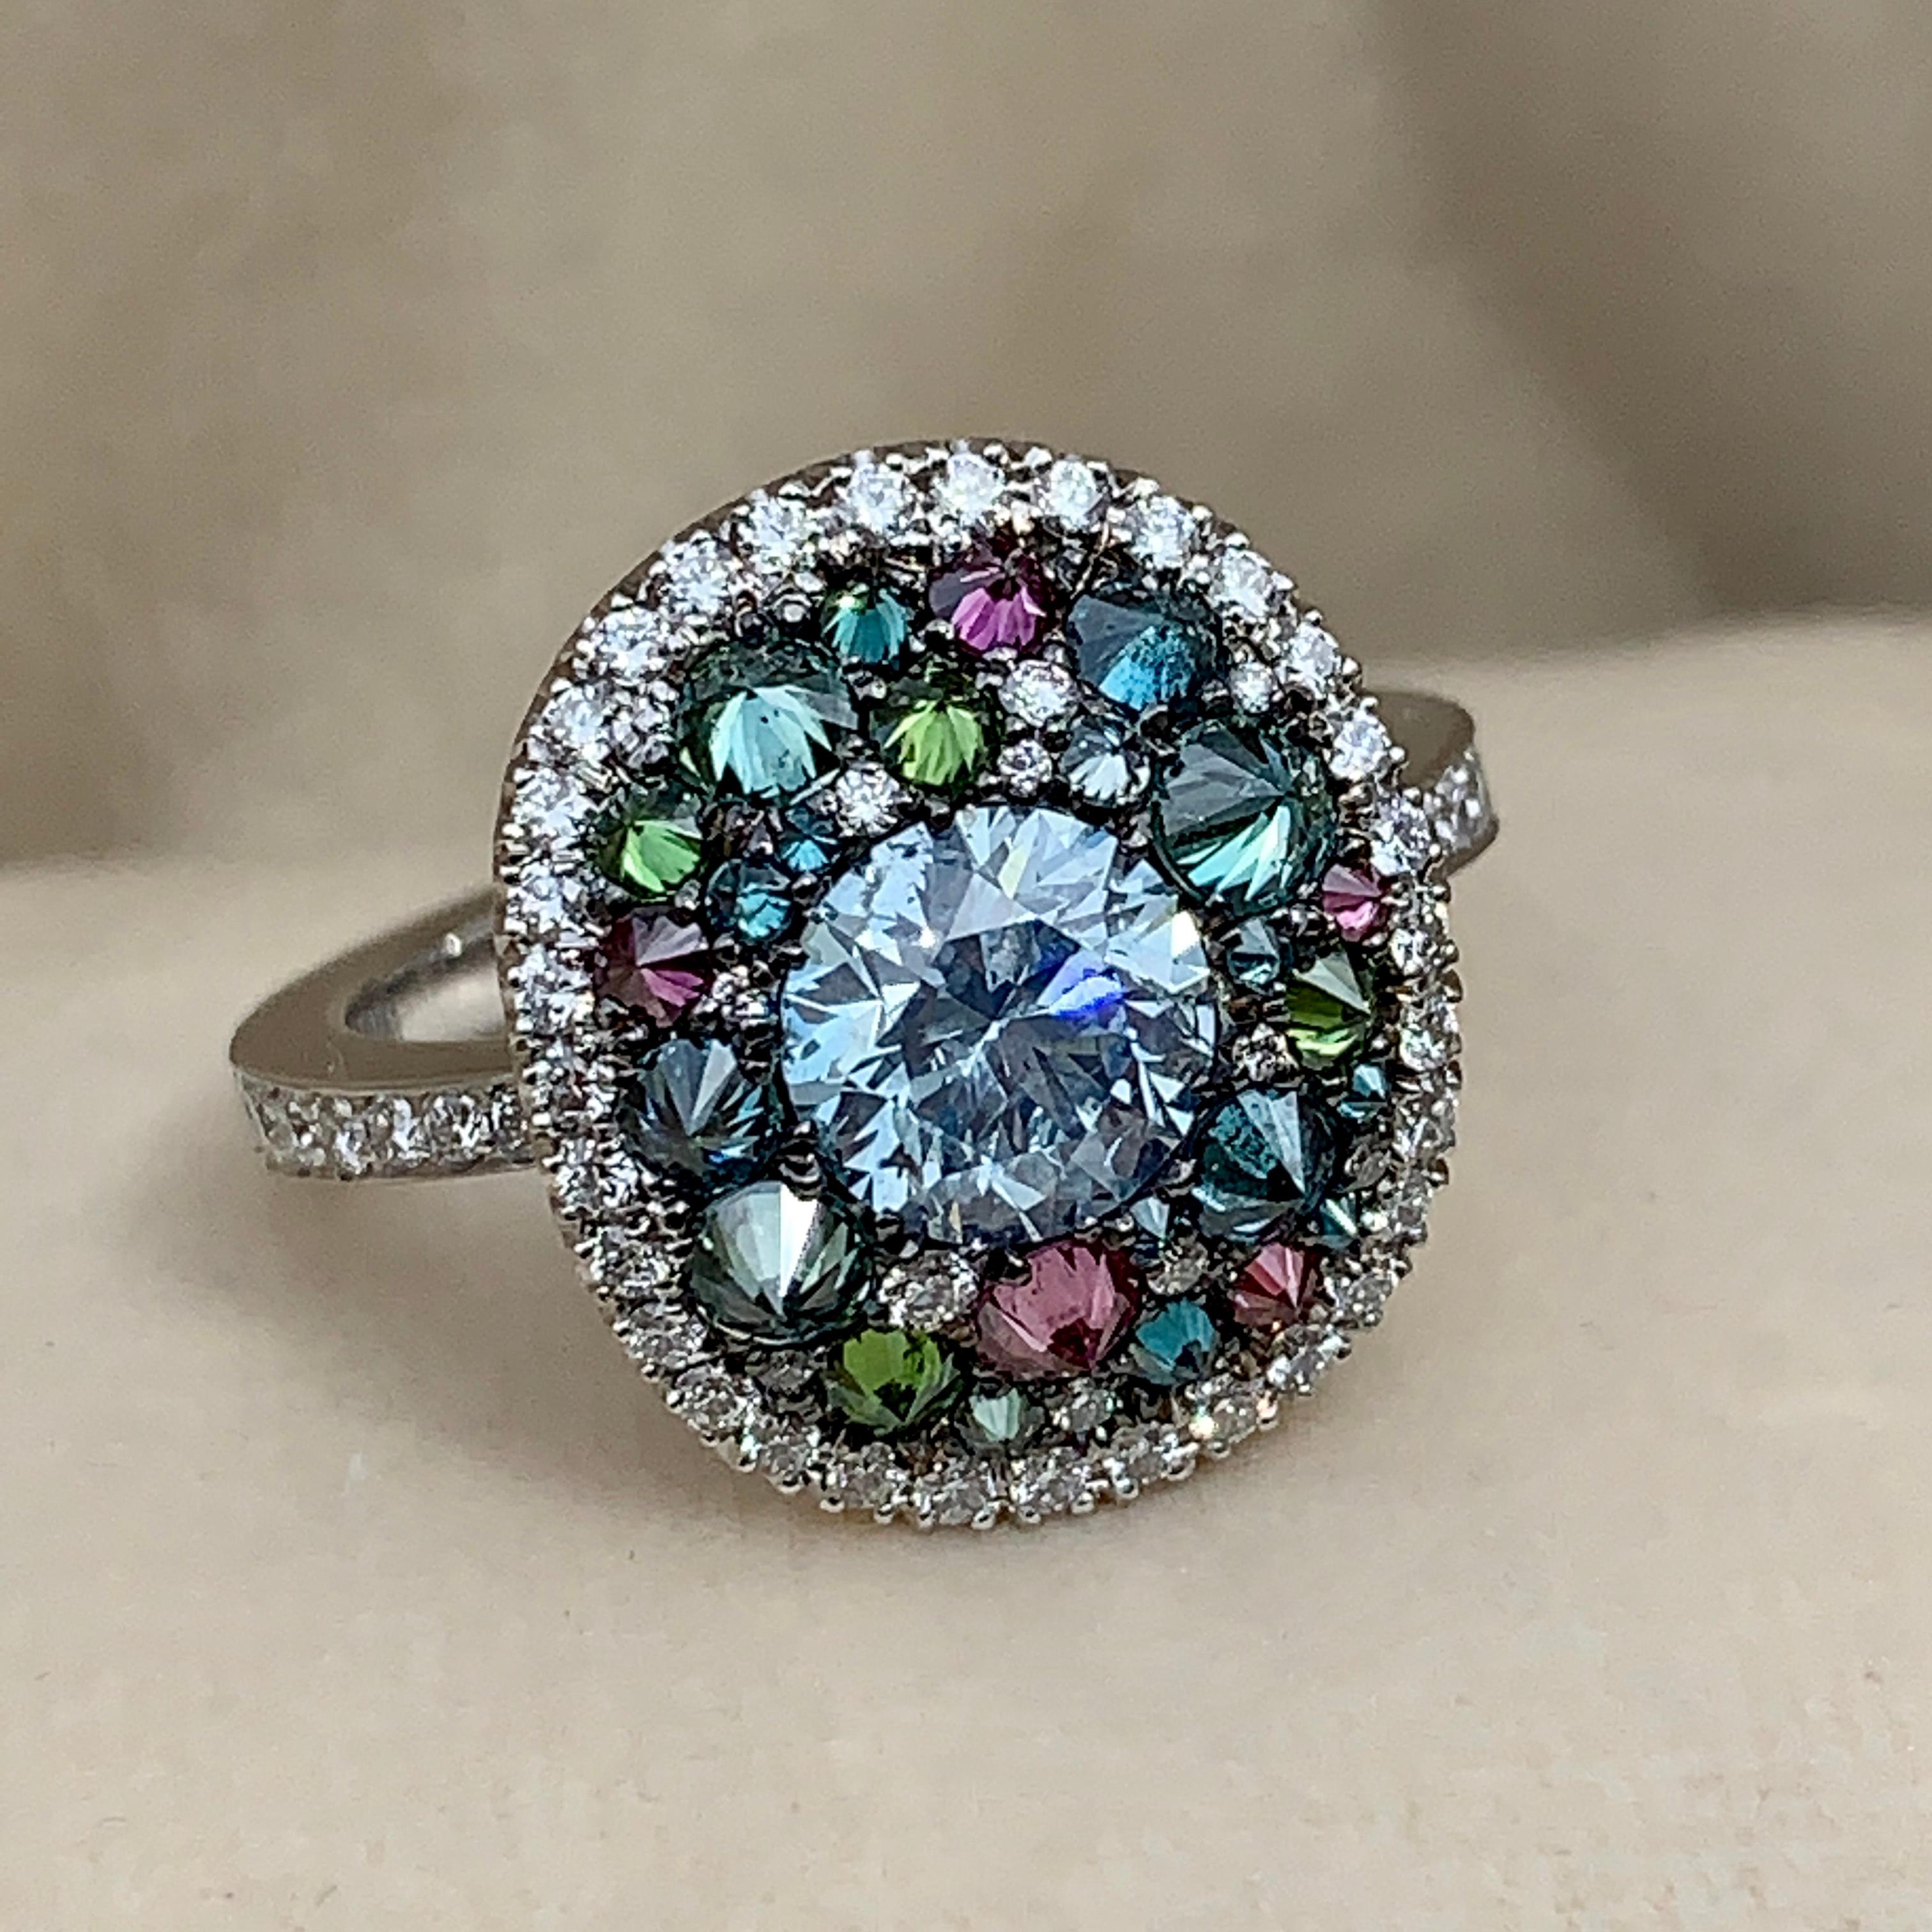 One of a kind ring in 18K White gold 6,9 g set with a natural coloured blue diamond centerstone 1,07 carat., white DEGVVS diamonds, Upside down set natural coloured Blue, green & purple diamonds 1,42 ct. Total diamonds: 2,49 carat.
Size EU 53 US 6,3